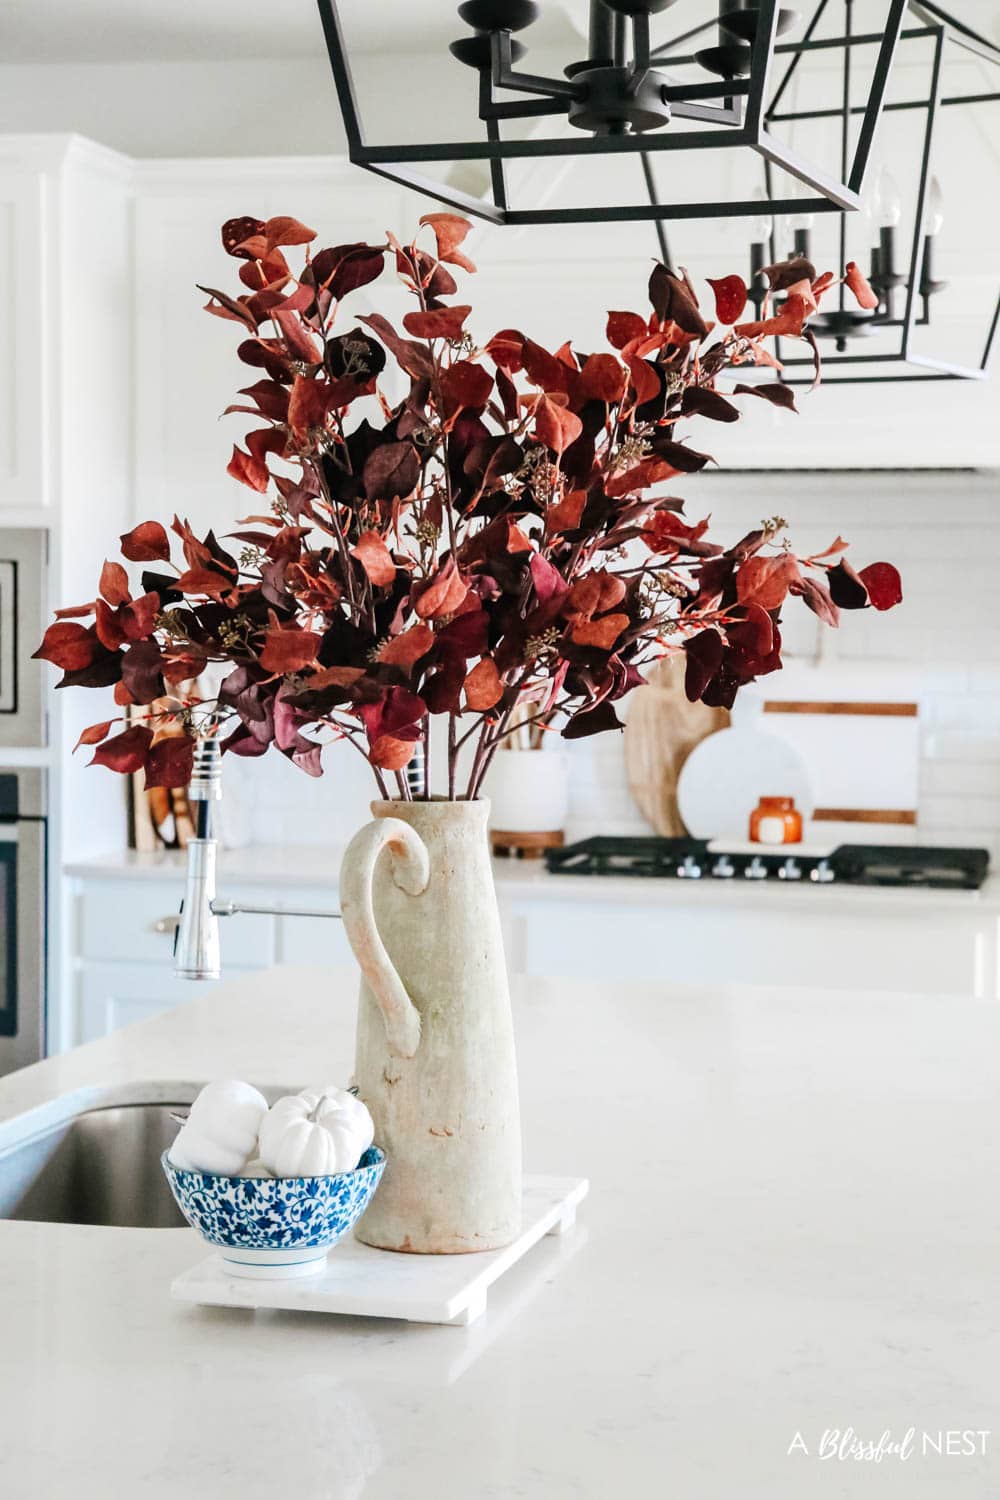 Beautiful fall decor details in this kitchen with burgundy eucalyptus leaves, delicious fall candles, Serena and Lily barstools. #ABlissfulNest #fallkitchen #falldecor #fallideas